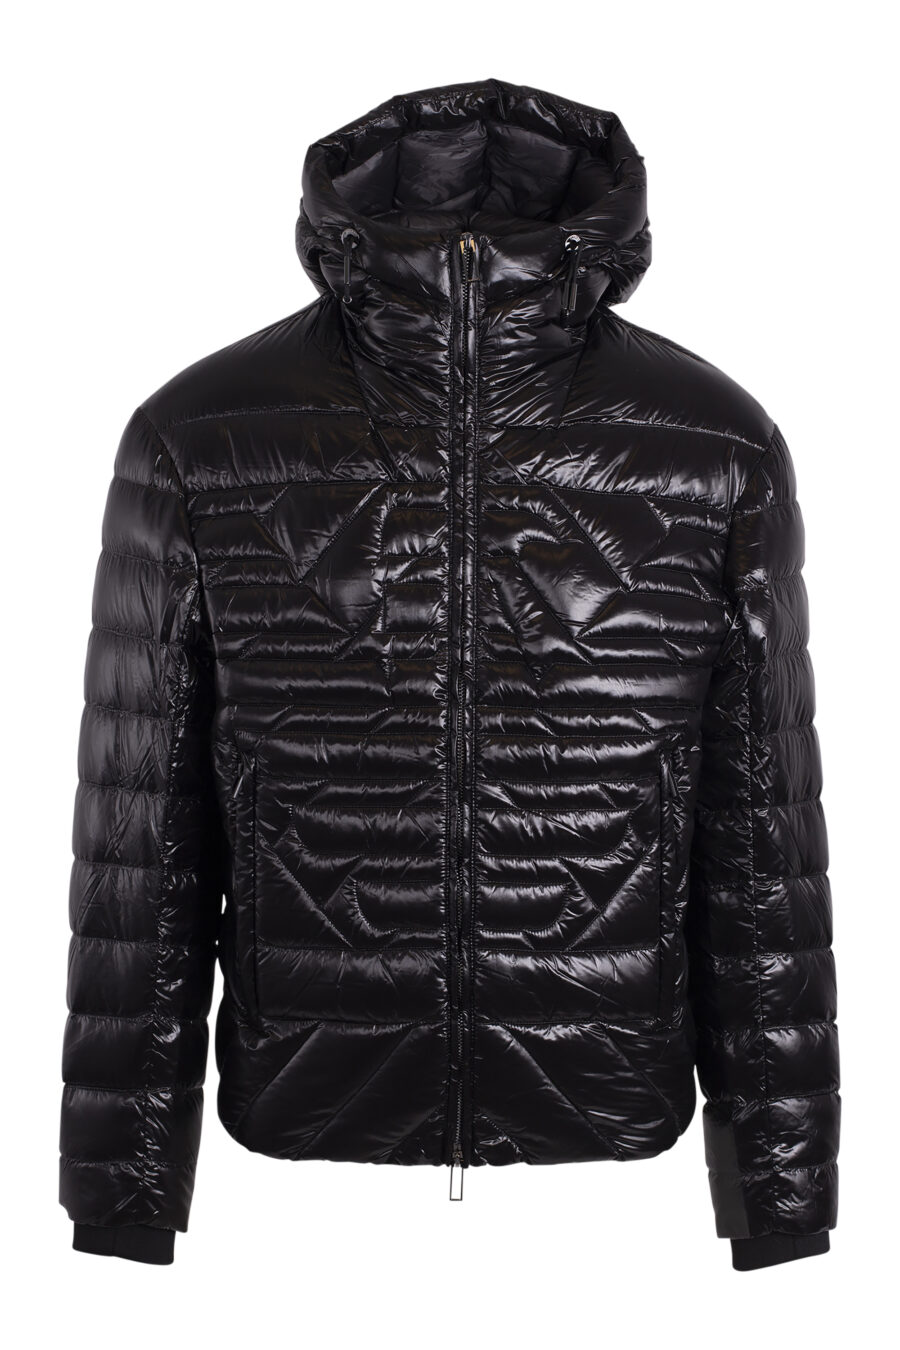 Black hooded quilted jacket with eagle logo - IMG 4680